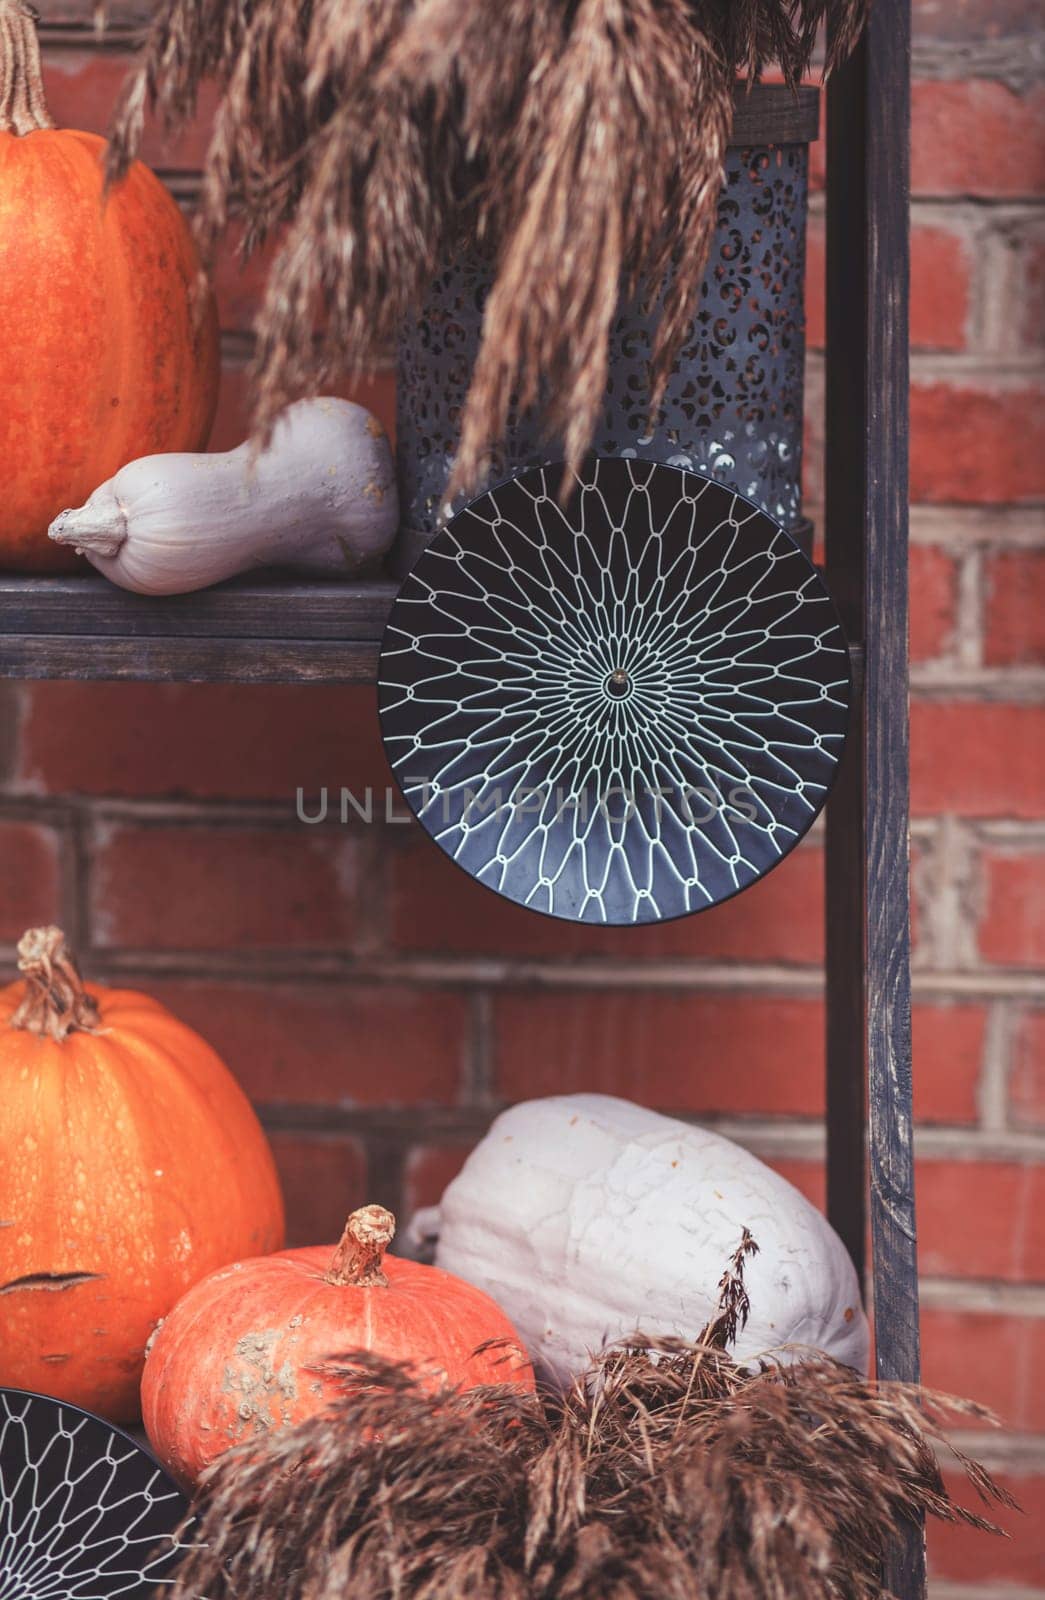 Halloween decorations with pumpkin and other decor elements